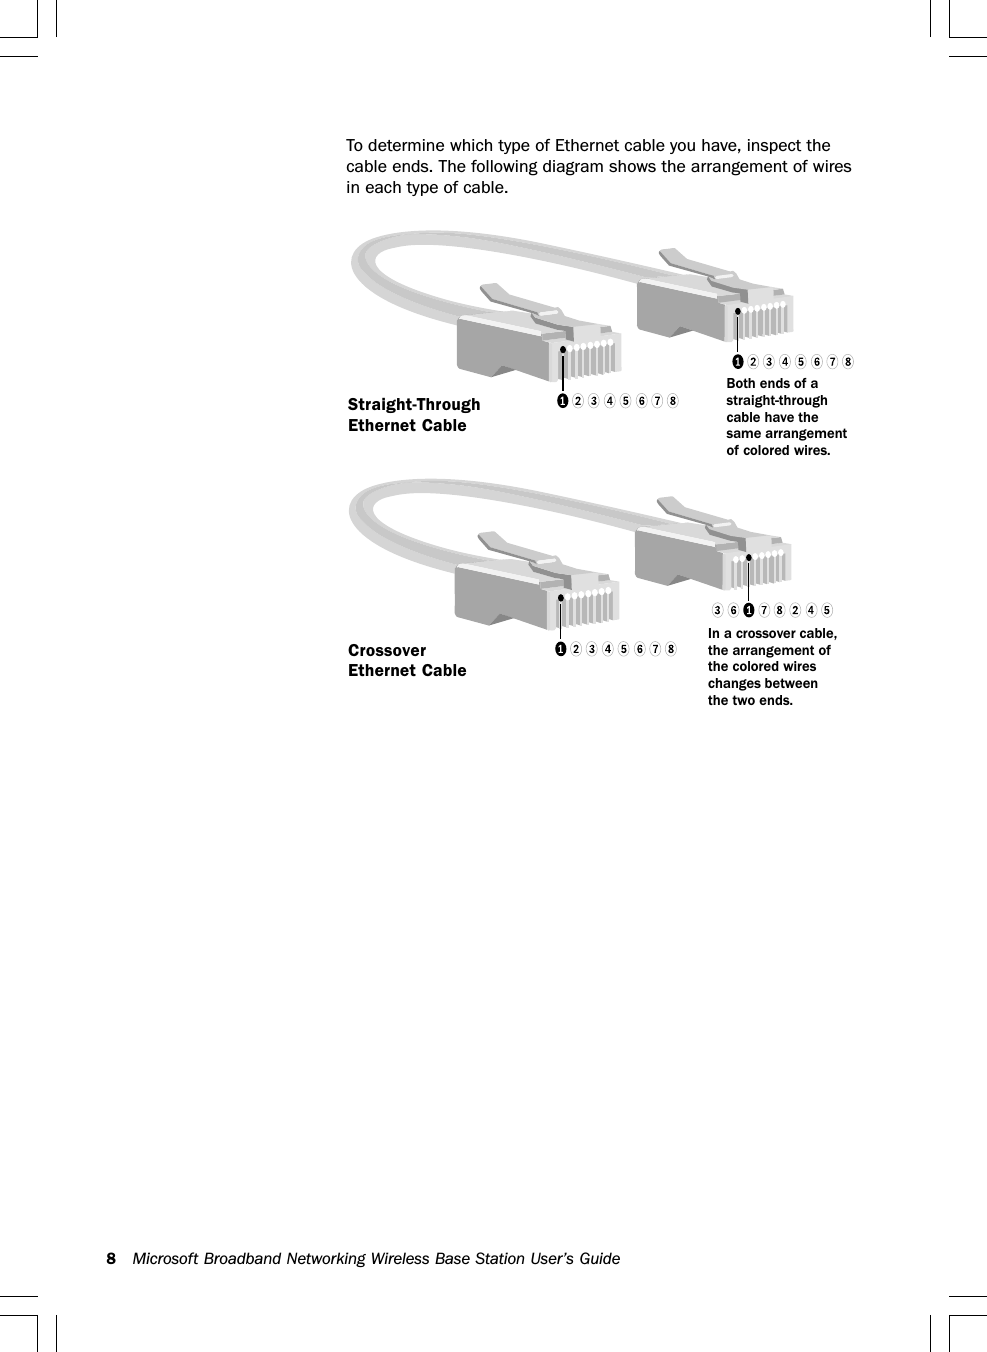 8Microsoft Broadband Networking Wireless Base Station User’s GuideTo determine which type of Ethernet cable you have, inspect thecable ends. The following diagram shows the arrangement of wiresin each type of cable.Straight-ThroughEthernet CableBoth ends of astraight-throughcable have thesame arrangementof colored wires.CrossoverEthernet CableIn a crossover cable,the arrangement ofthe colored wireschanges betweenthe two ends.